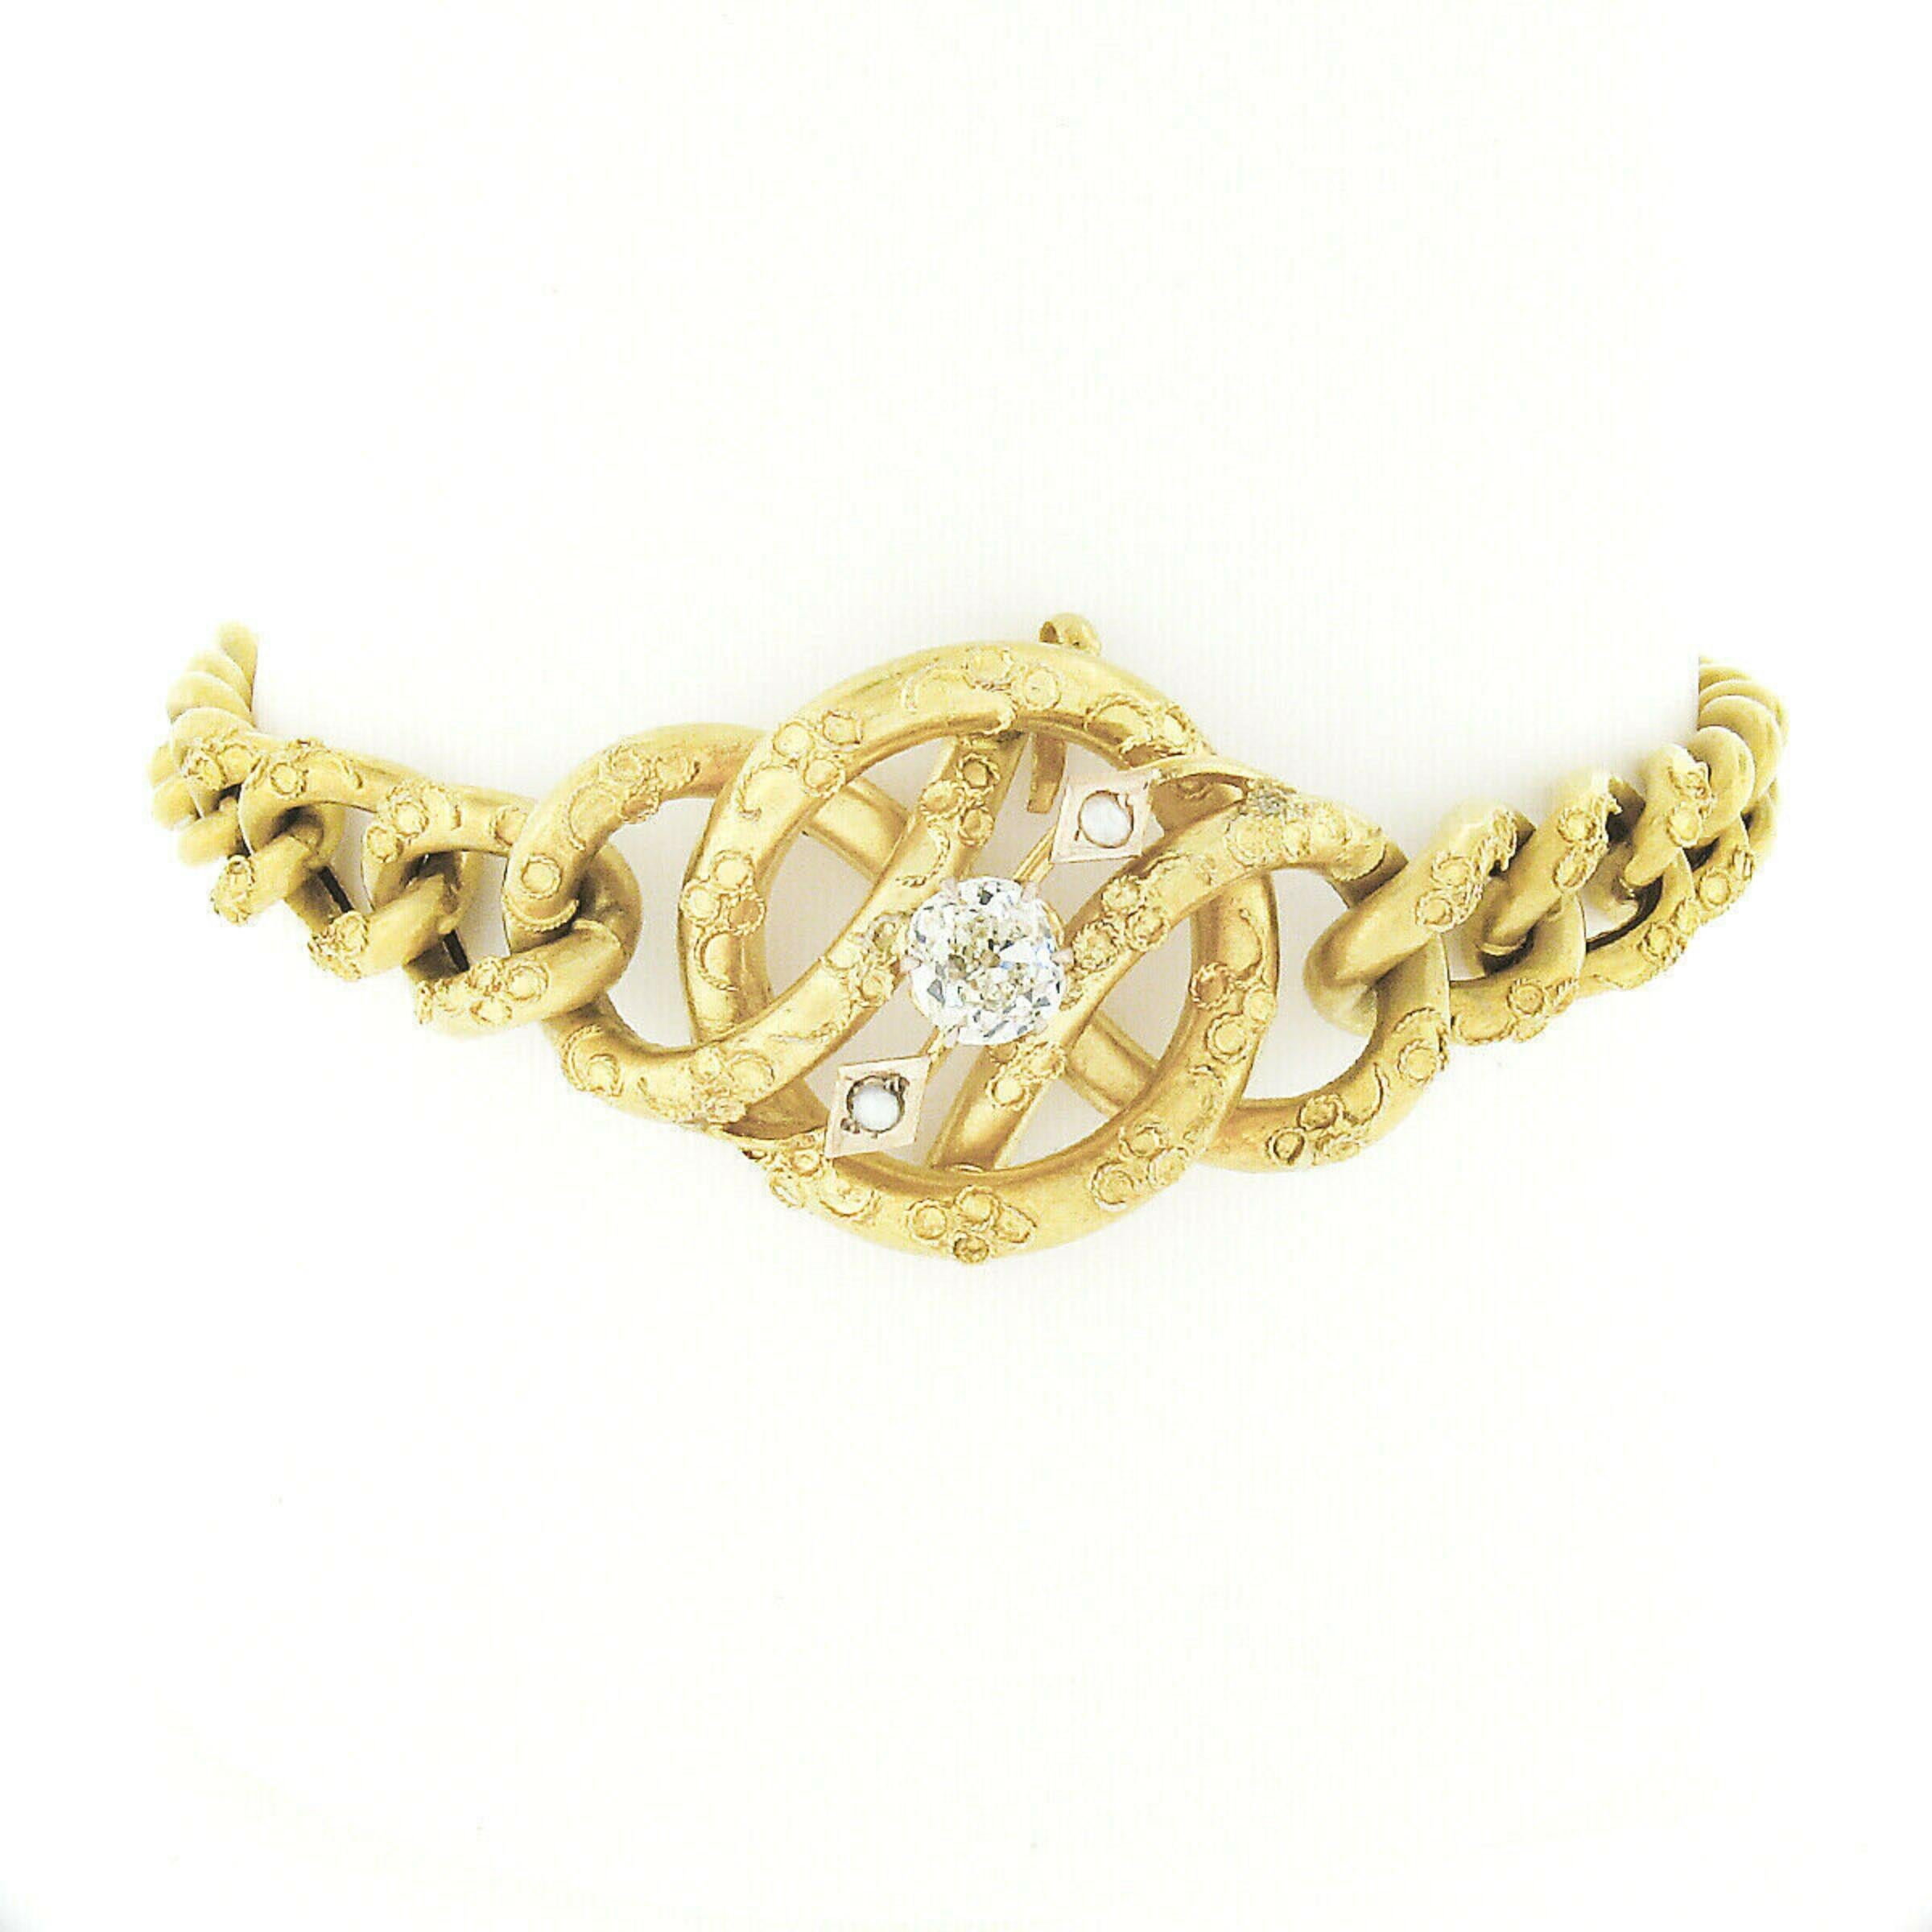 This magnificent antique bracelet was crafted in solid 18k yellow gold during the Victorian era. The top of the bracelet features an elegant tube work design that is decorated with an adorable floral wire work pattern and neatly set with a GIA